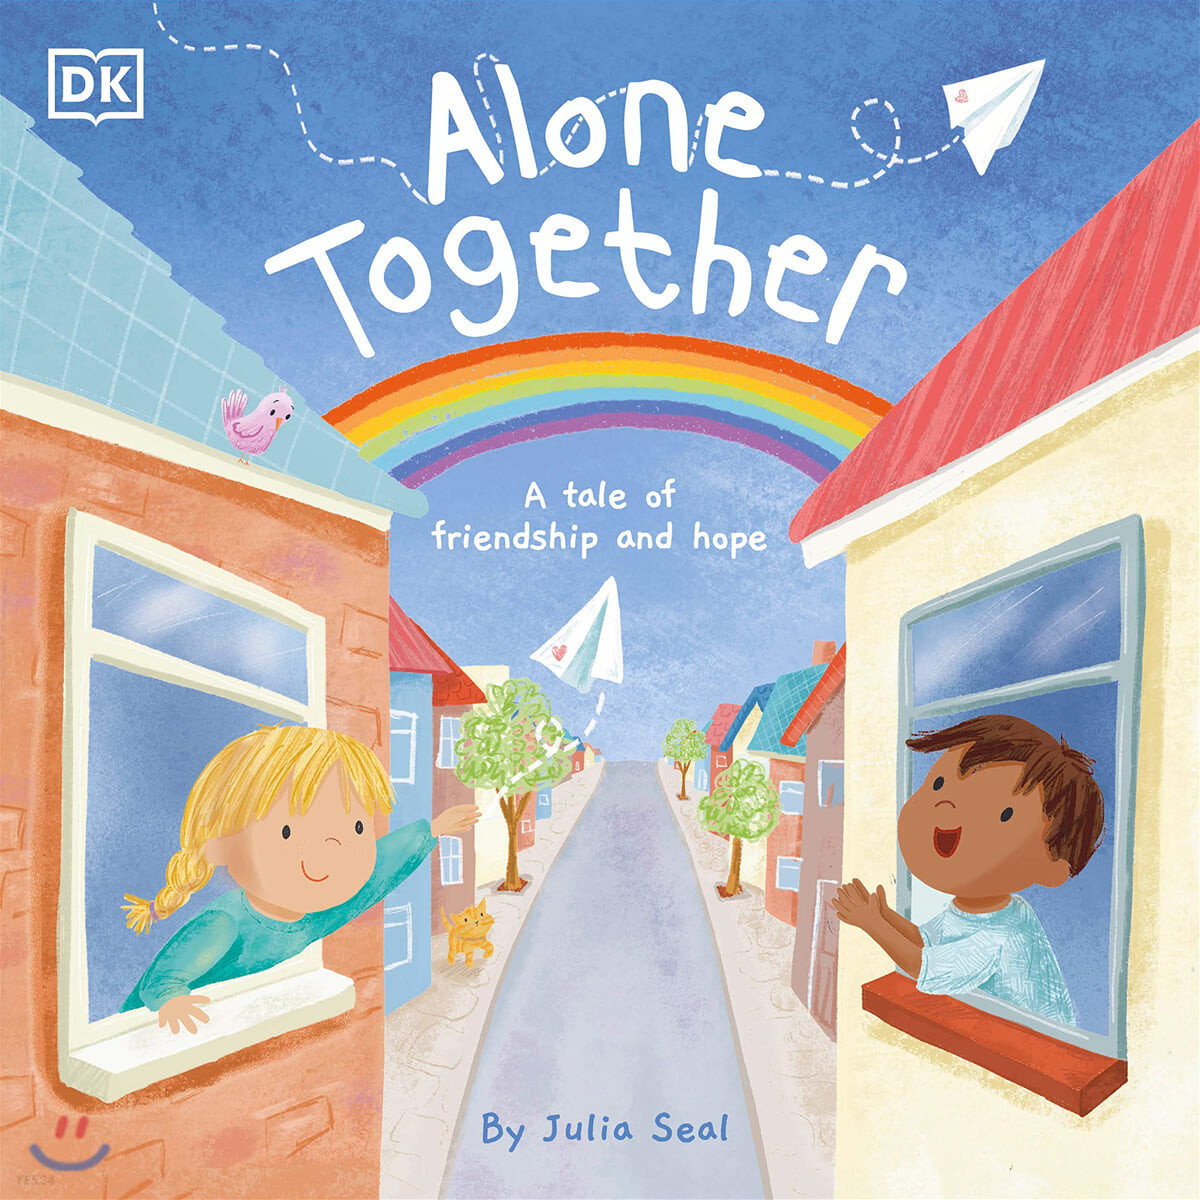 Alone together : a tale of friendship and hope